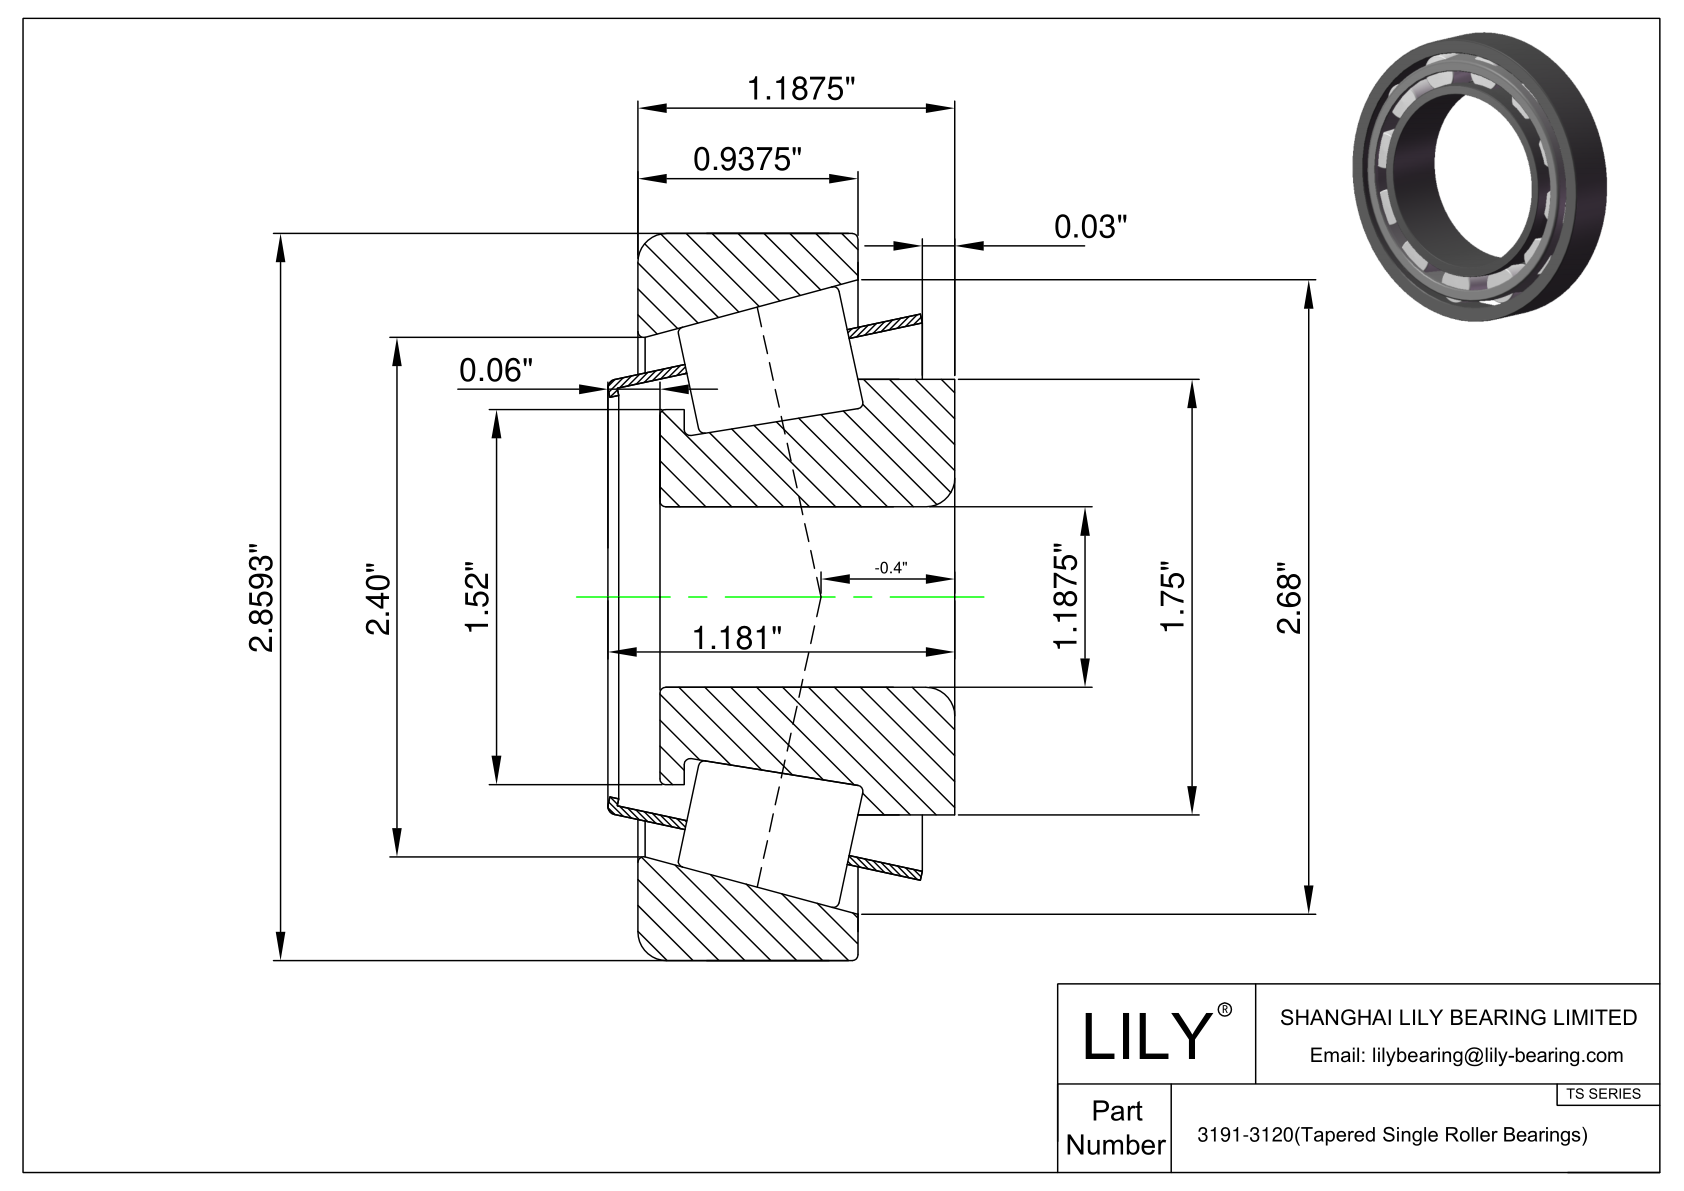 3191-3120 TS (Tapered Single Roller Bearings) (Imperial) cad drawing